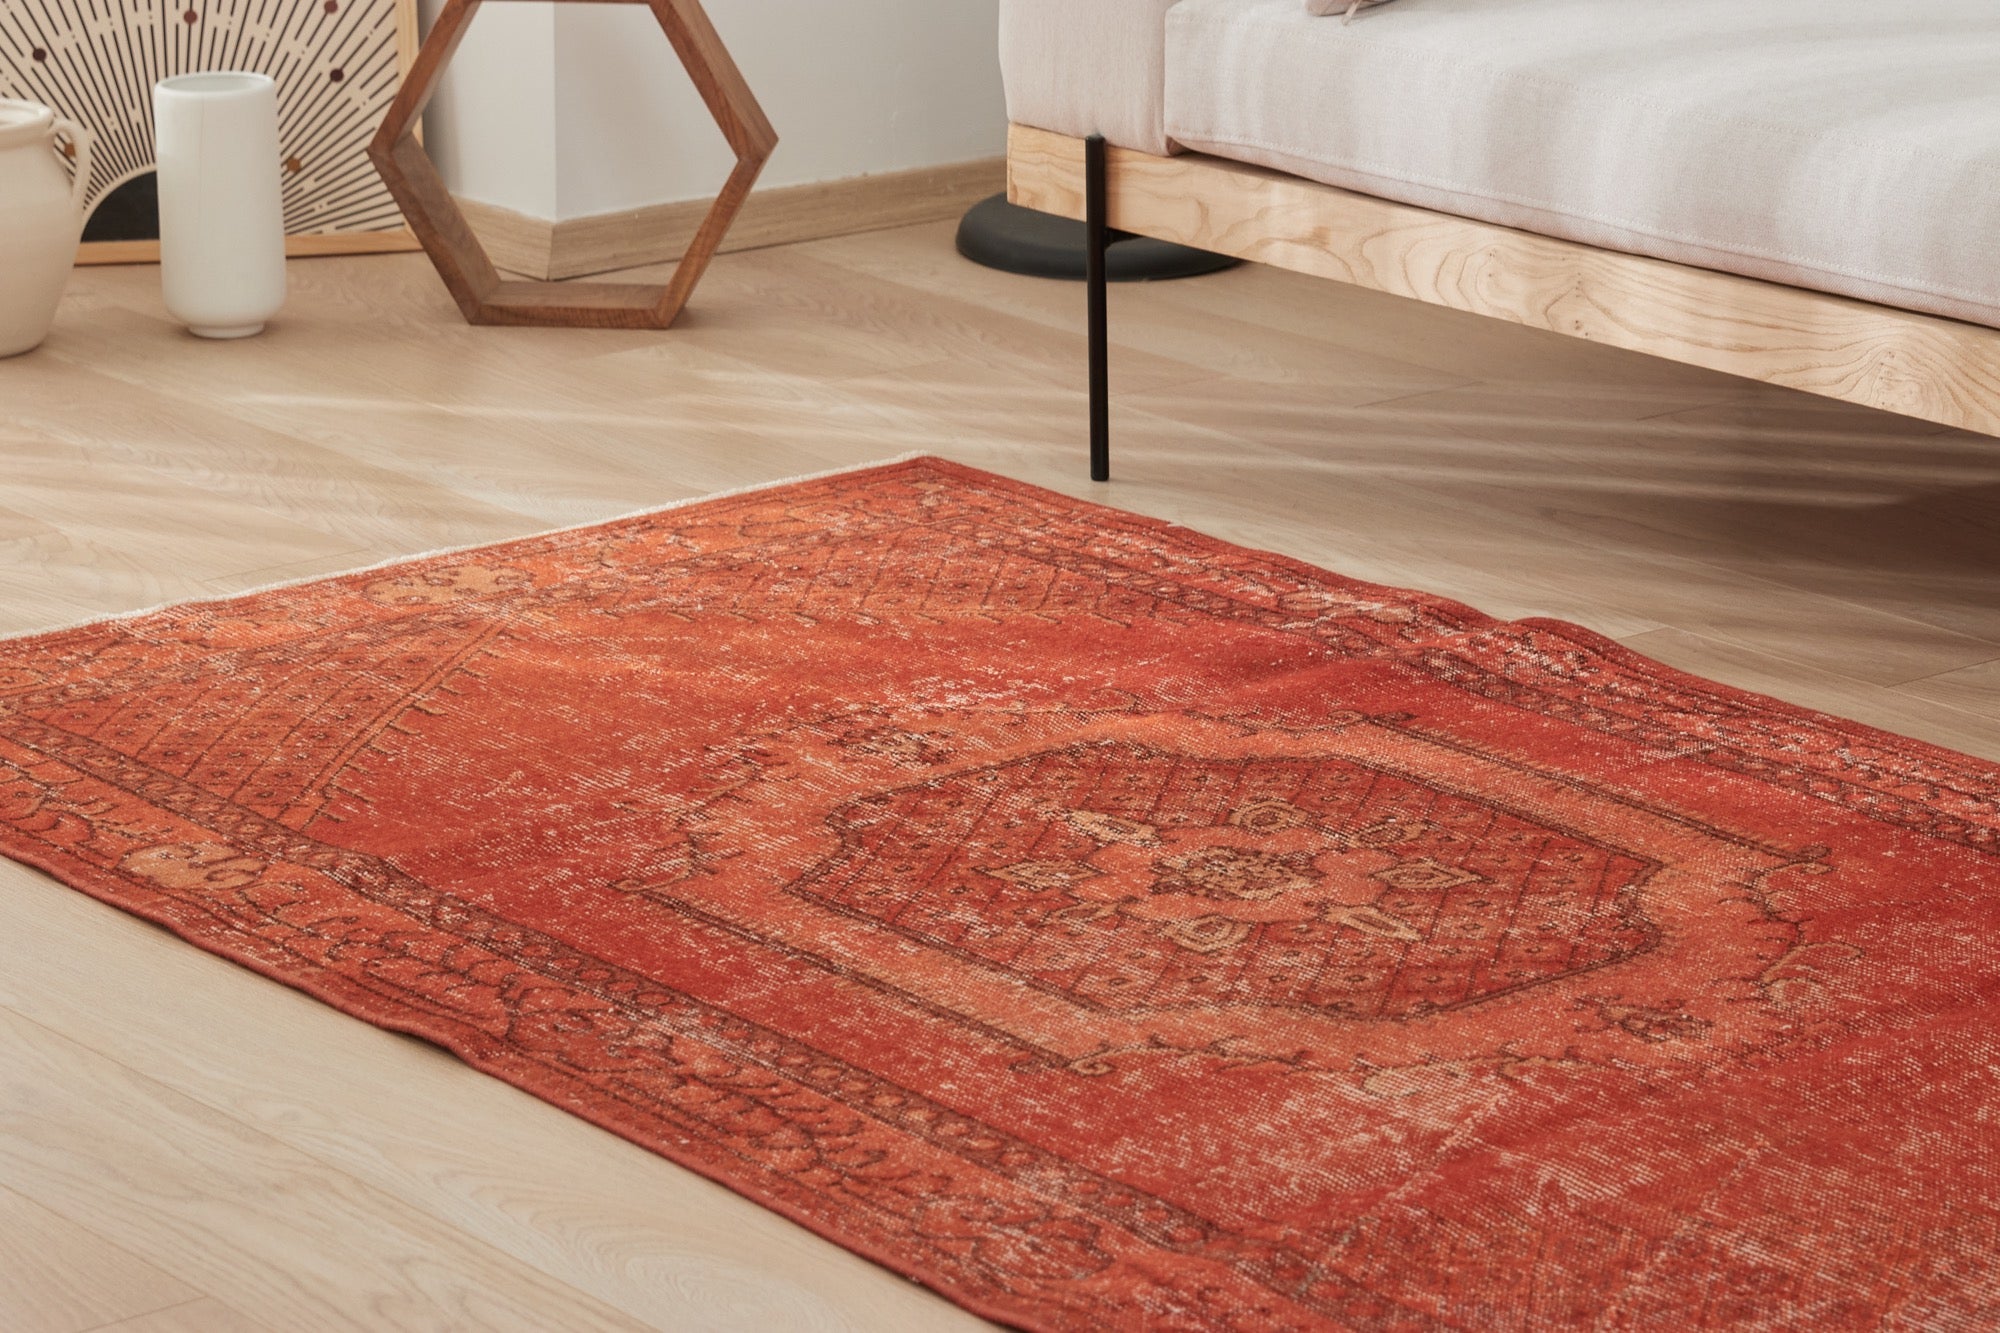 Discover Frankie | Luxurious Traditional Rug Craftsmanship | Kuden Rugs